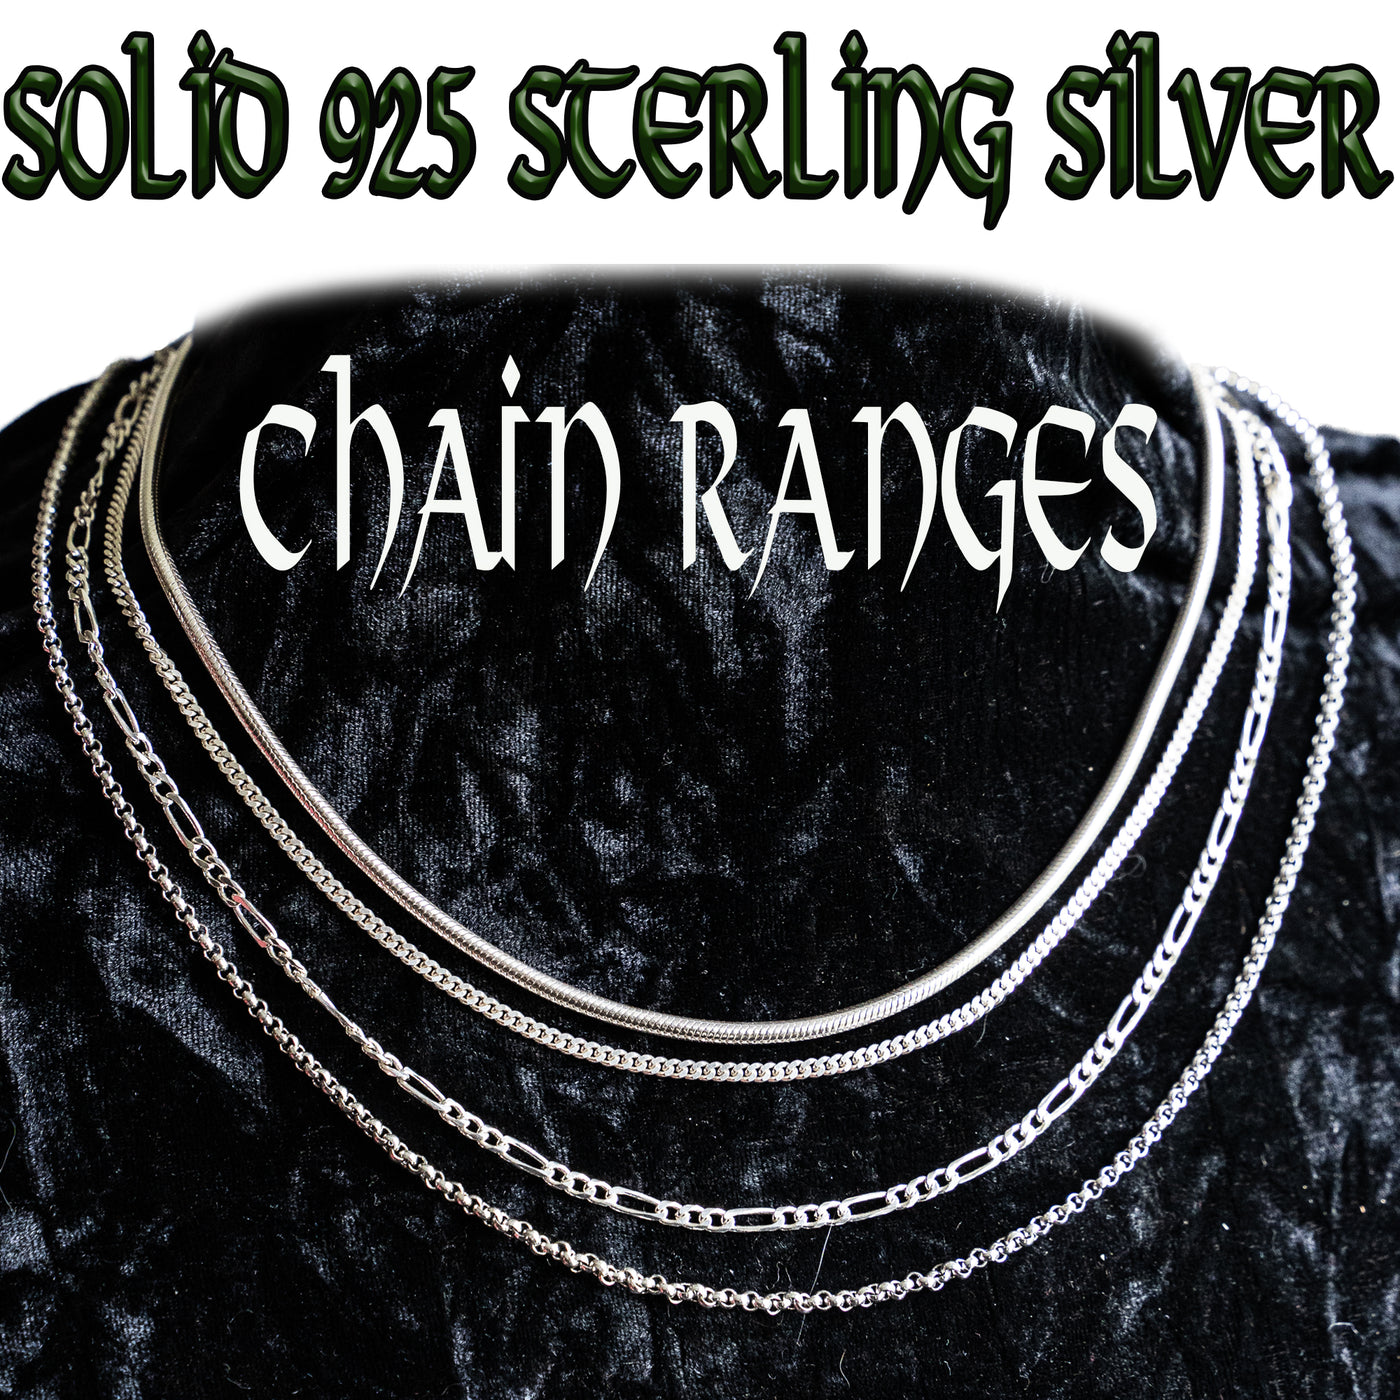 Belcher, Curb & Snake Chain - 925 Solid Sterling Silver